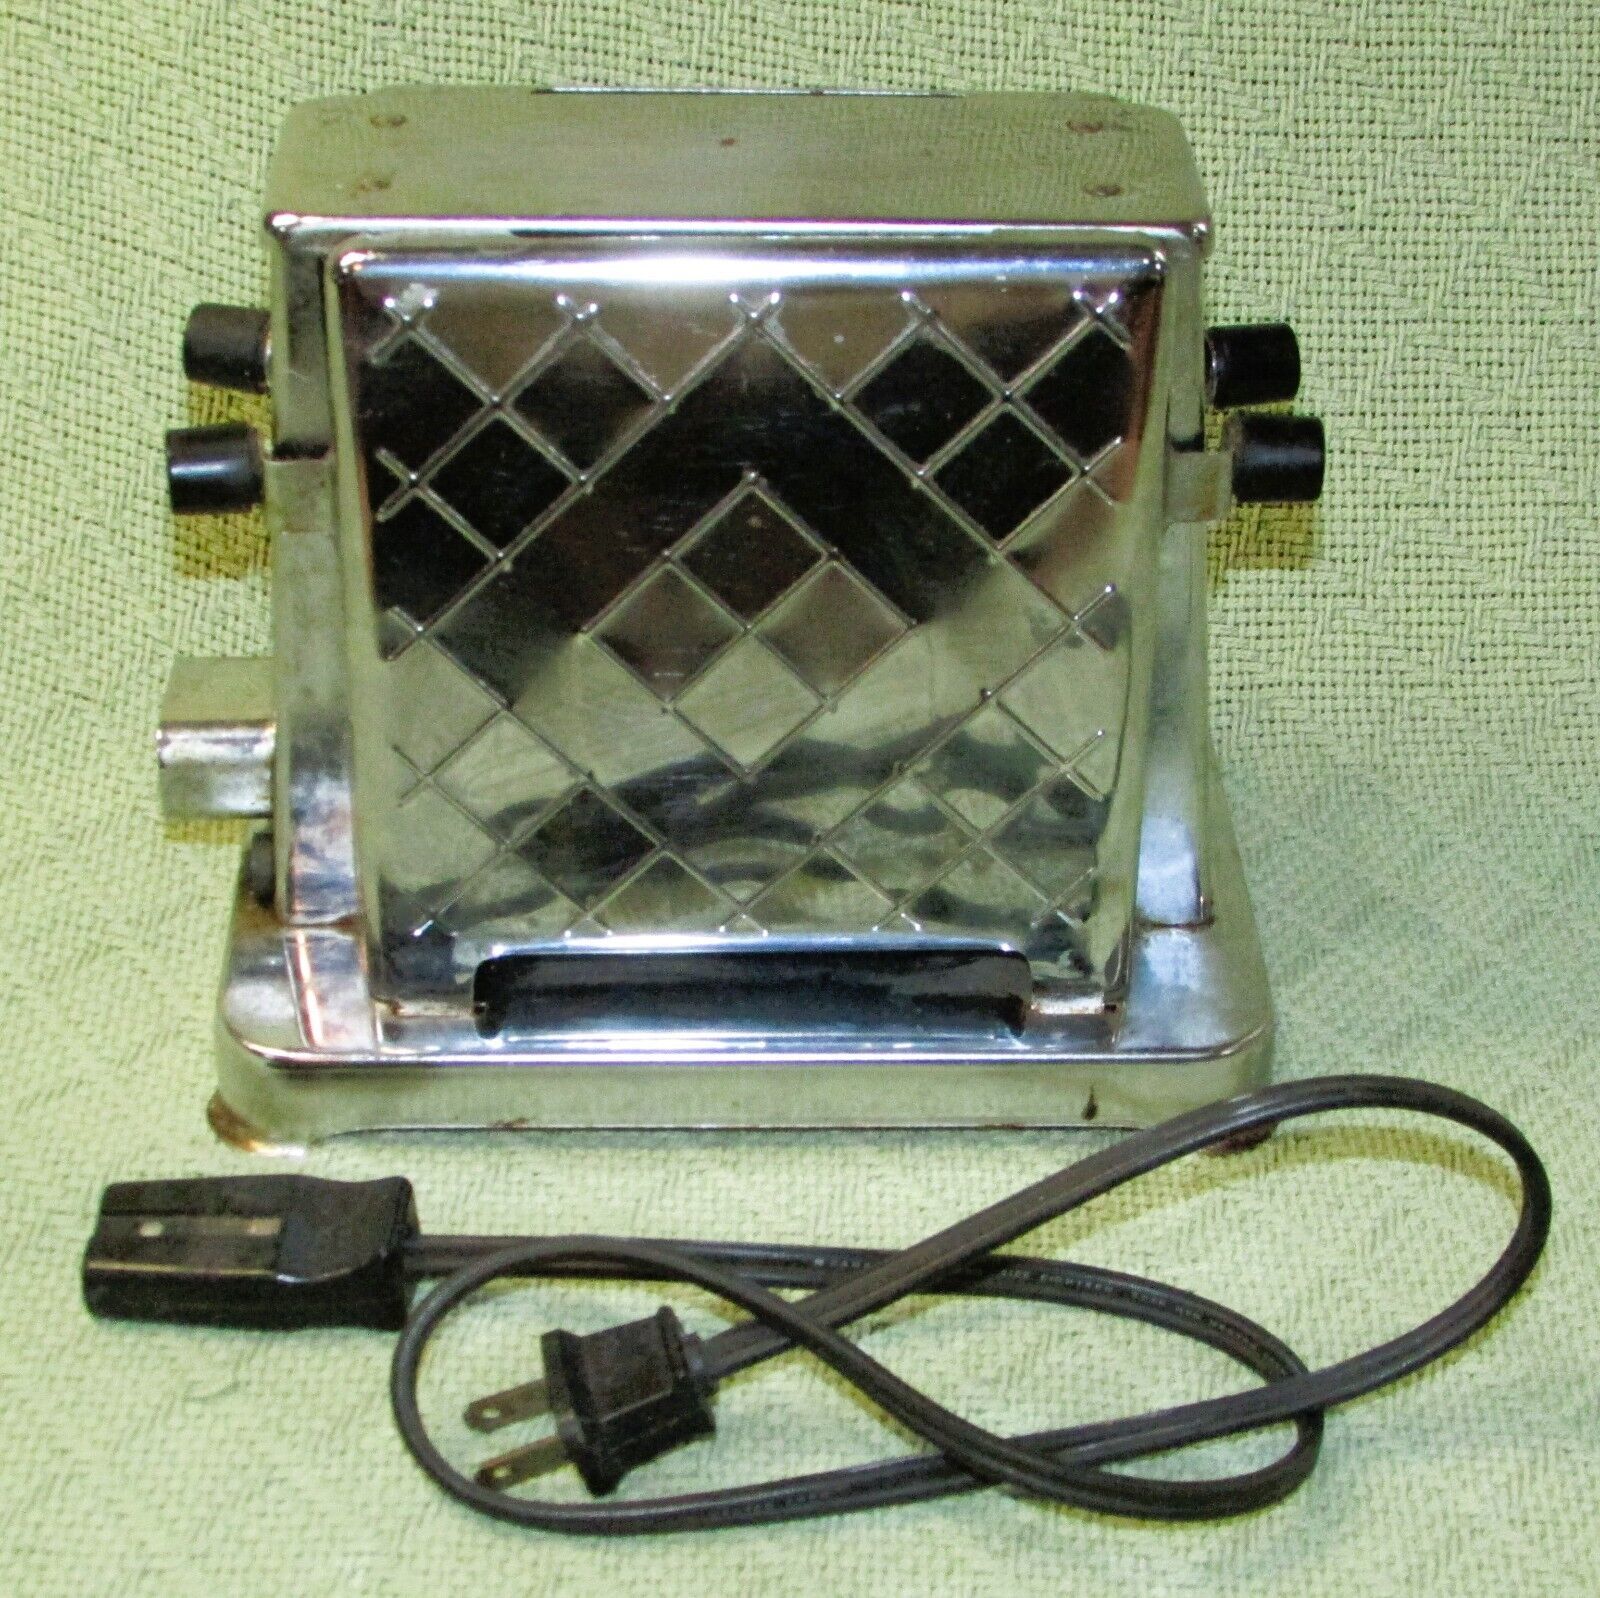 TOASTESS 2 SIDED ELECTRIC TOASTER 1940s MONTREAL CANADA GENERAL ELECTRIC VINTAGE - $35.10